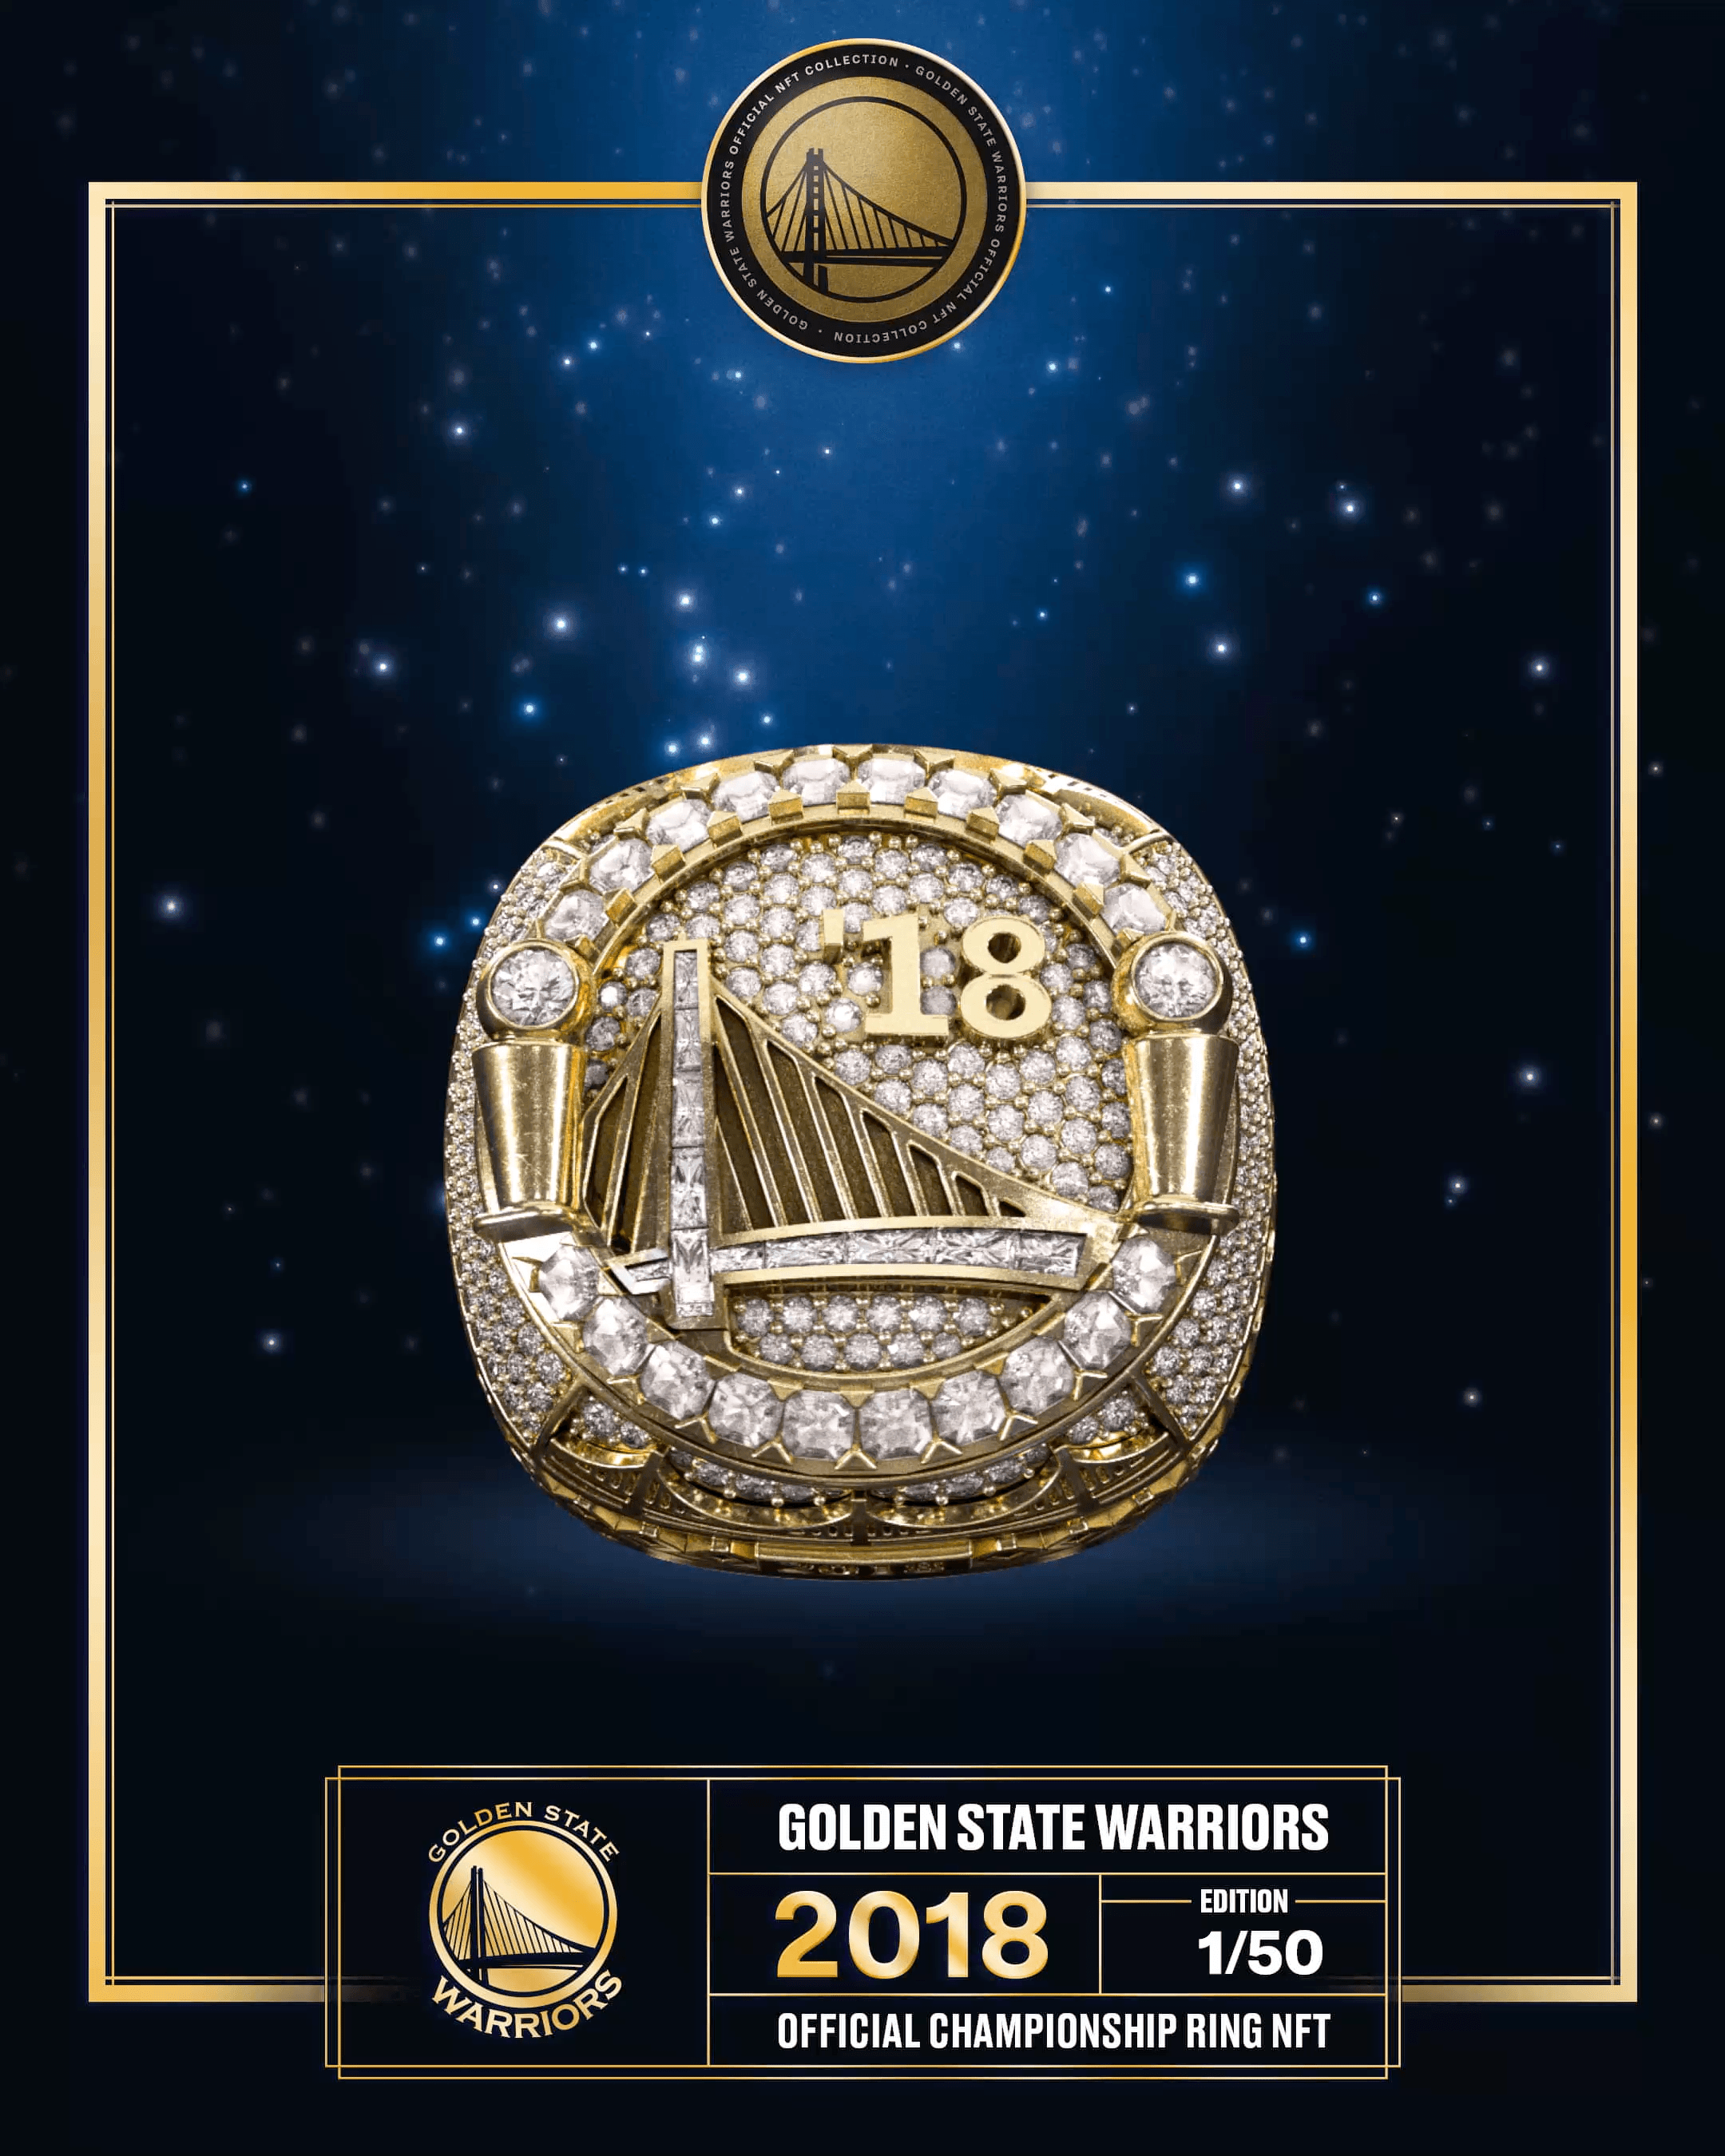 Edition 1 - 2018 Warriors Championship Ring NFT & Physical Ring (1/50)